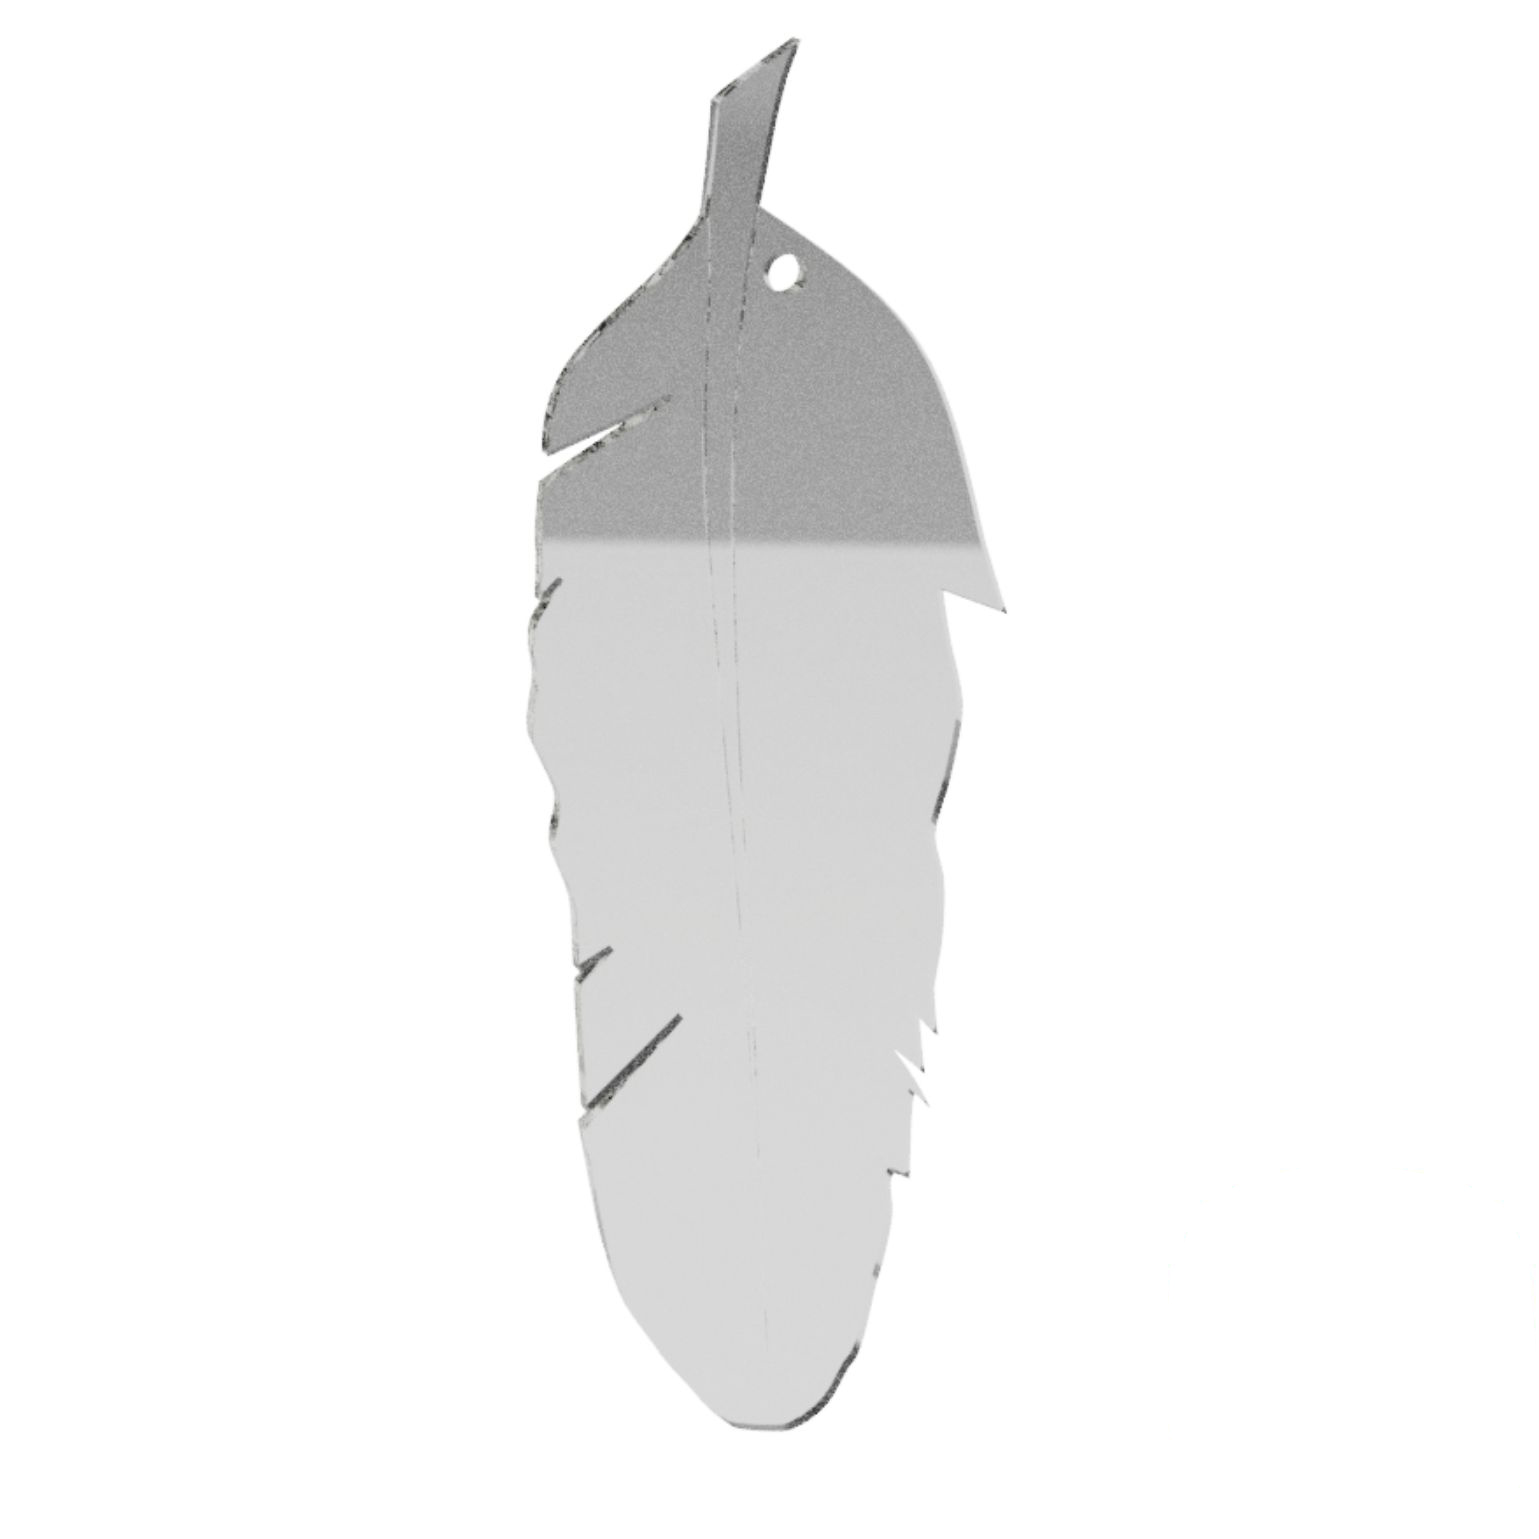 acryliccraft.com - Blank Feather - 125mm